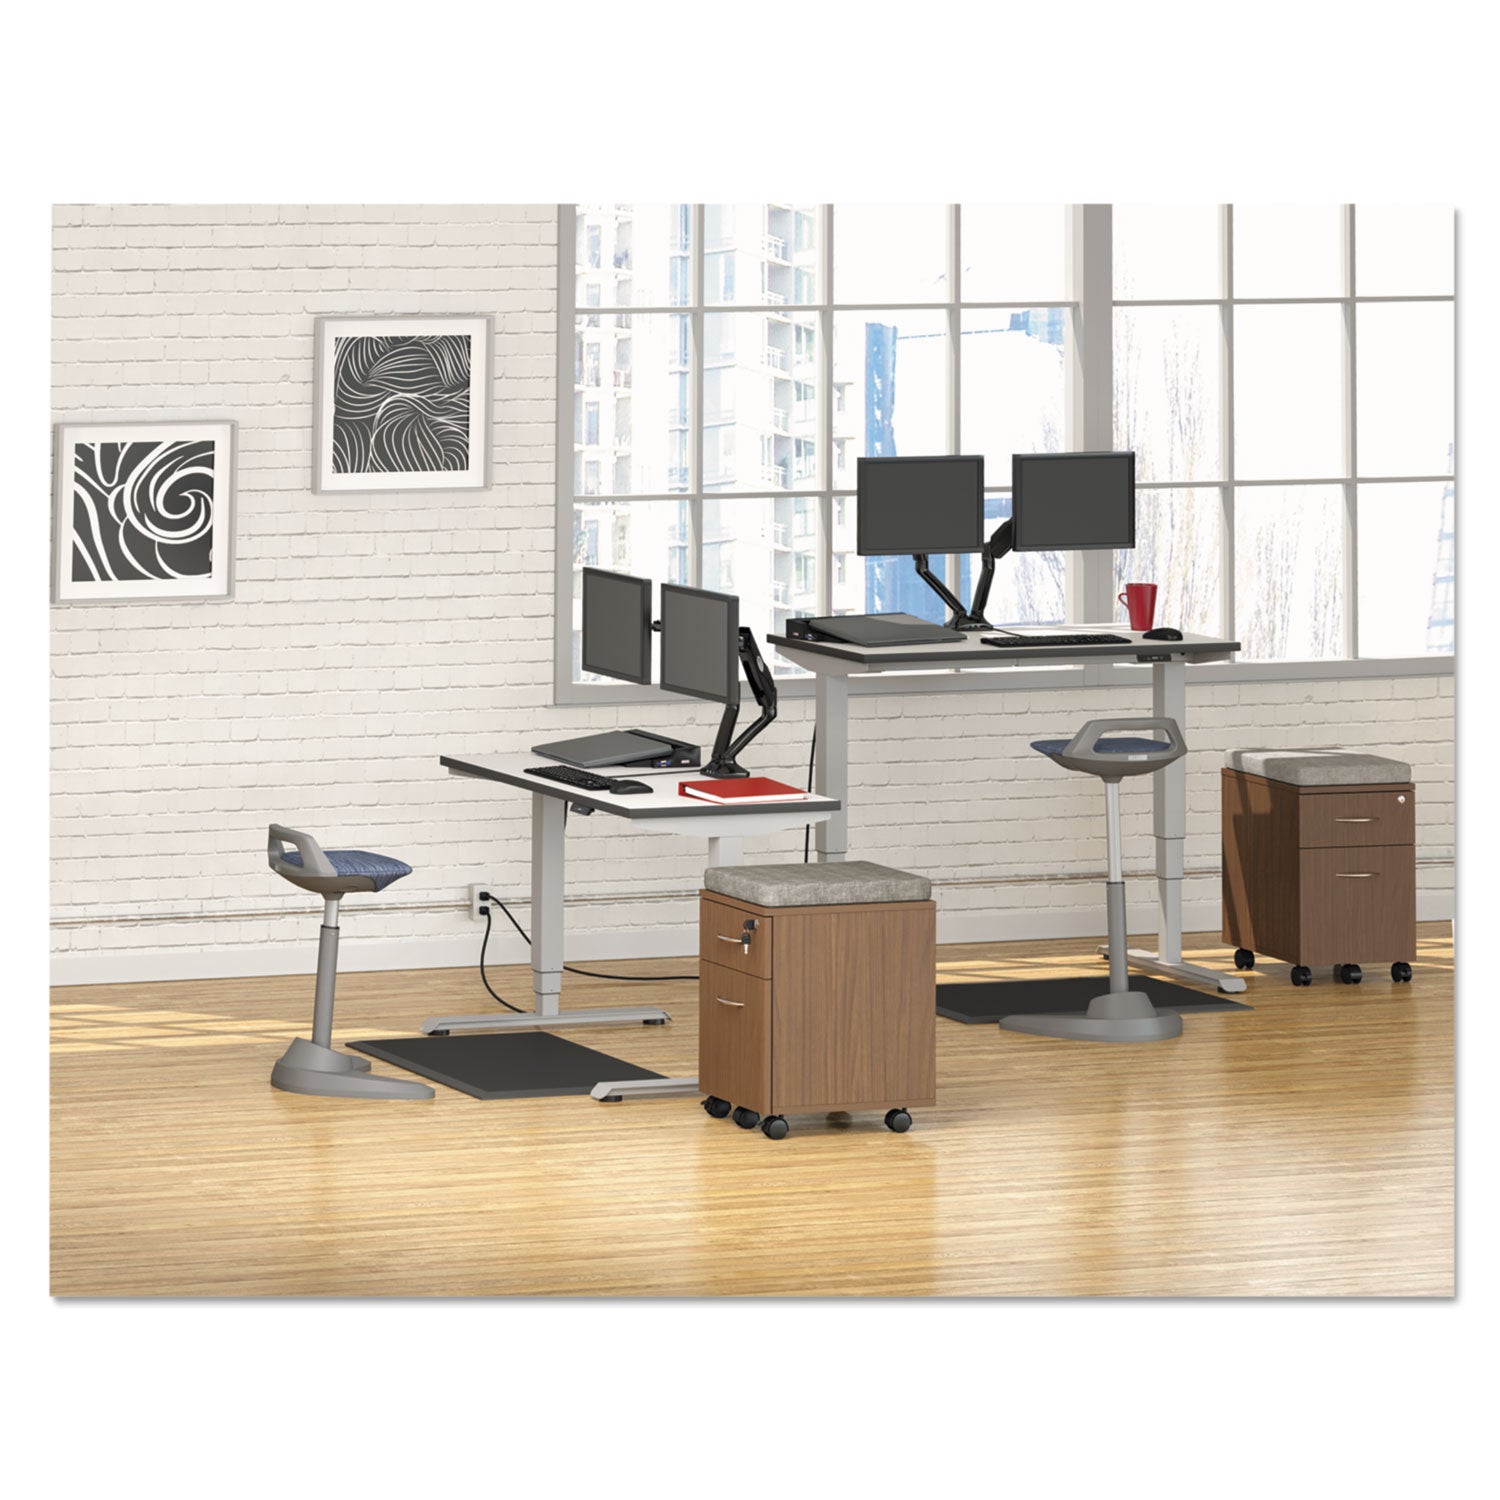 adaptivergo-sit-stand-3-stage-electric-height-adjustable-table-base-with-memory-control-4806-x-2435-x-25-to-507-gray_aleht3sag - 4